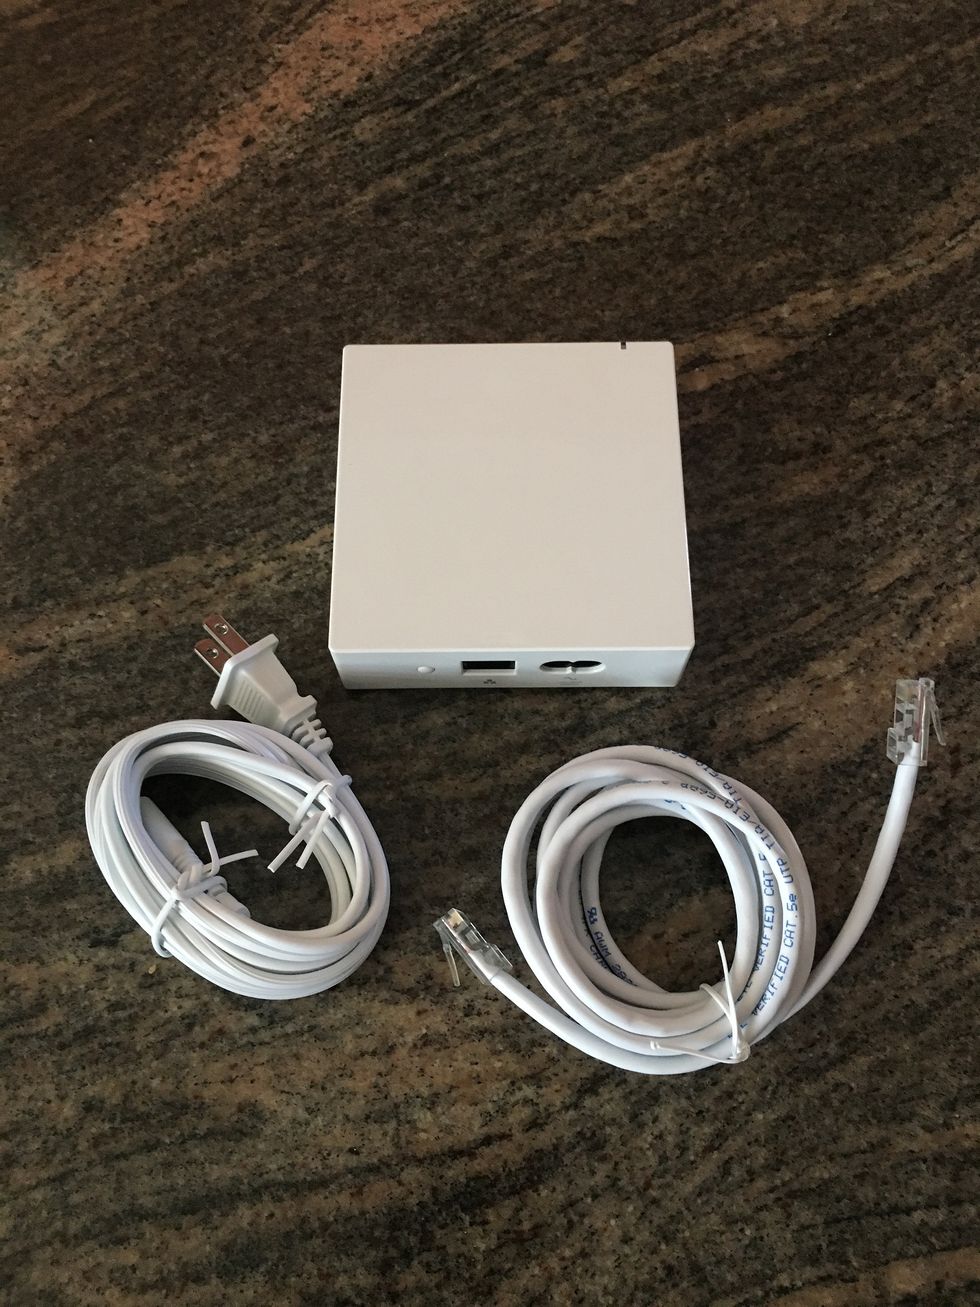 A\u00a0photo of Insteon smart hub and power cords